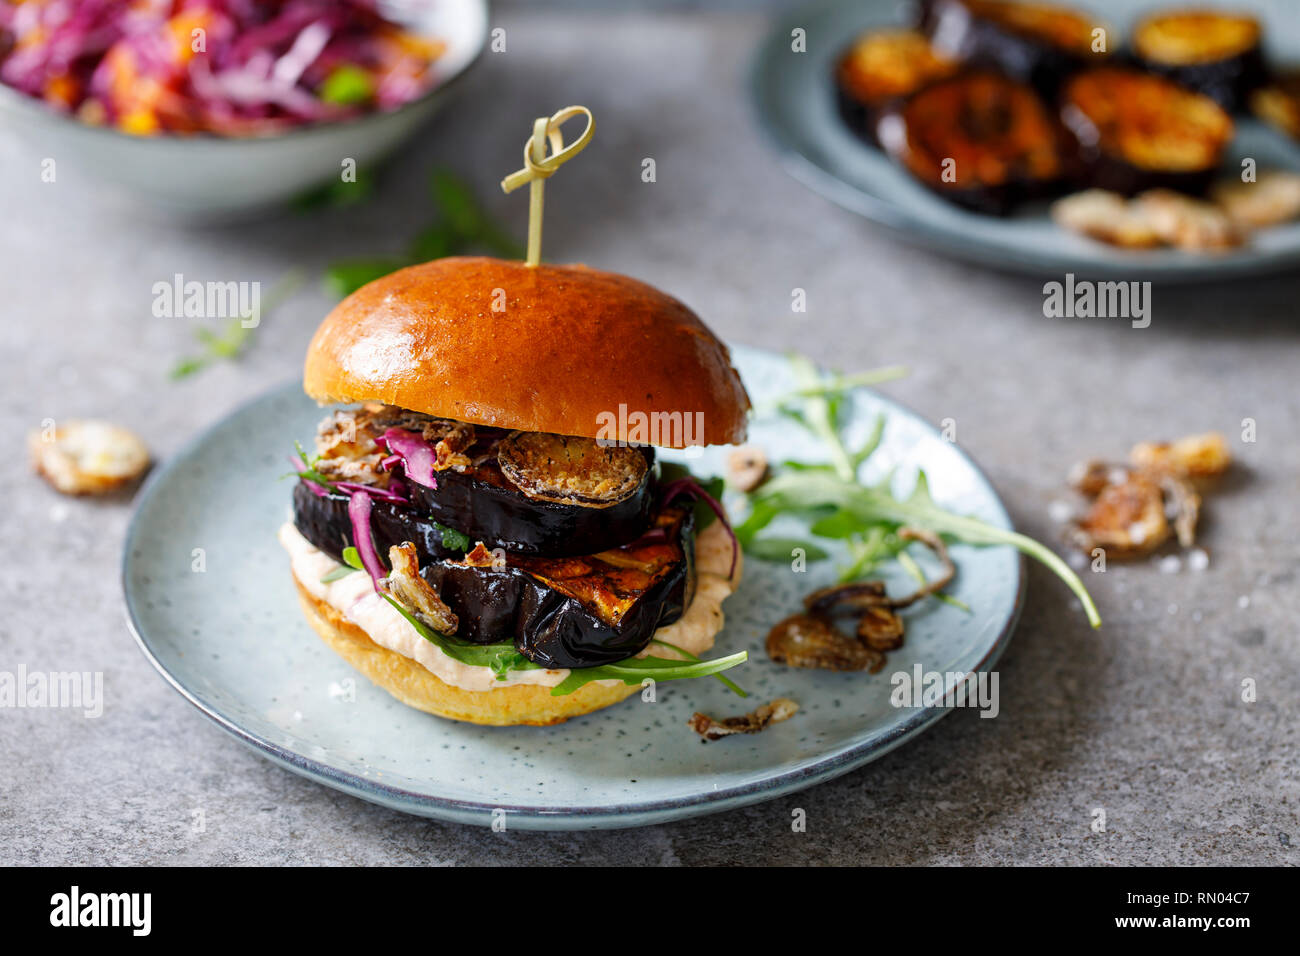 Vegan burger with white bean puree and spicy aubergine slices Stock Photo